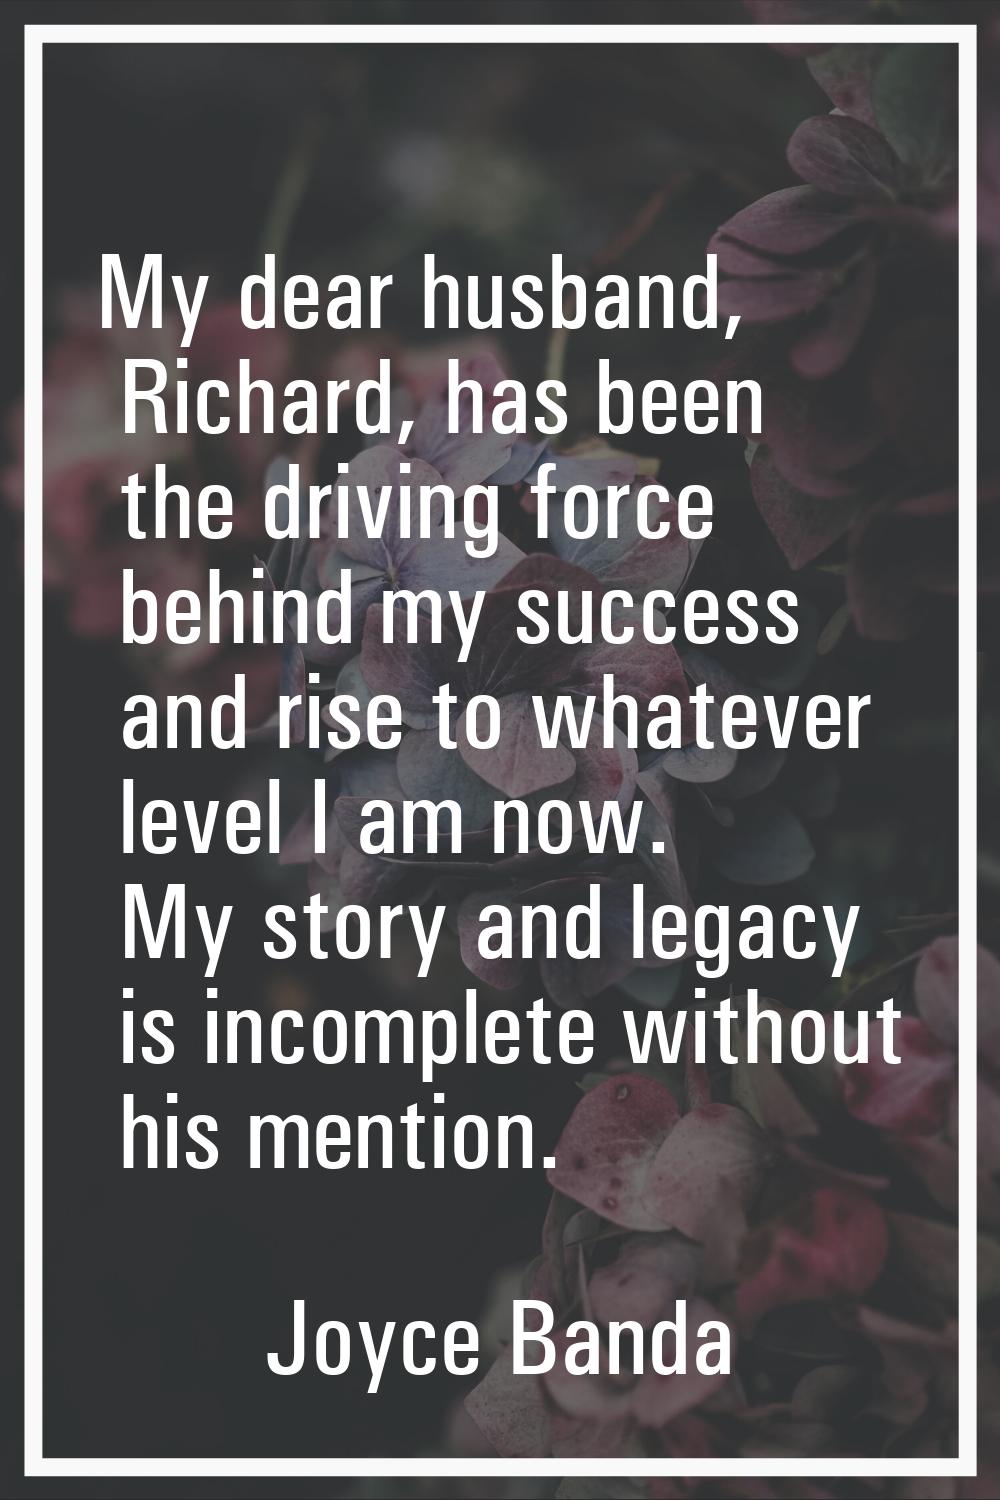 My dear husband, Richard, has been the driving force behind my success and rise to whatever level I